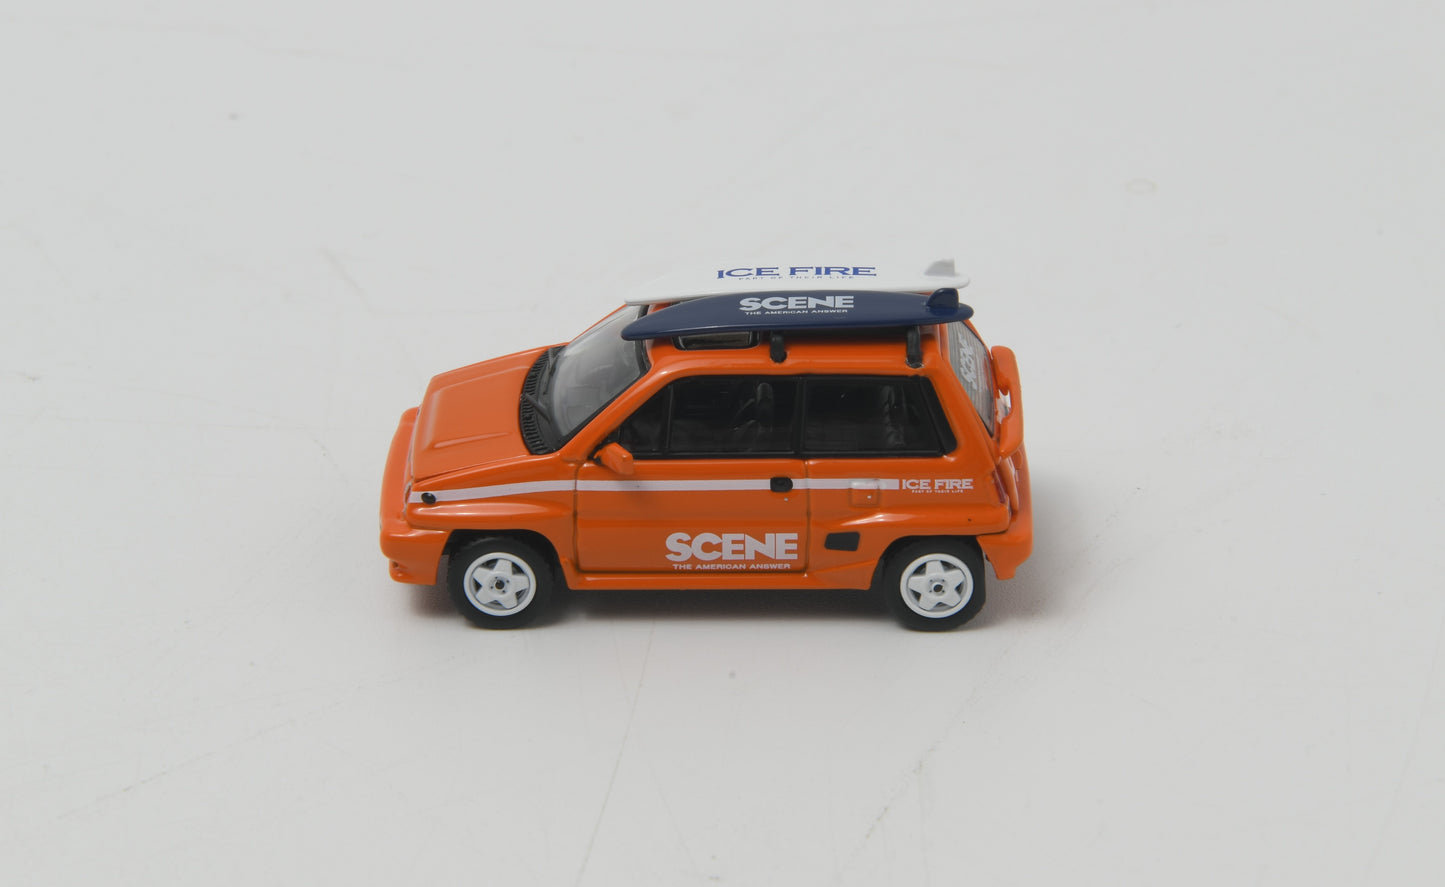 Honda City Turbo II with Motocompo special version (Scene by Ice Fire) (此價格包含運費)